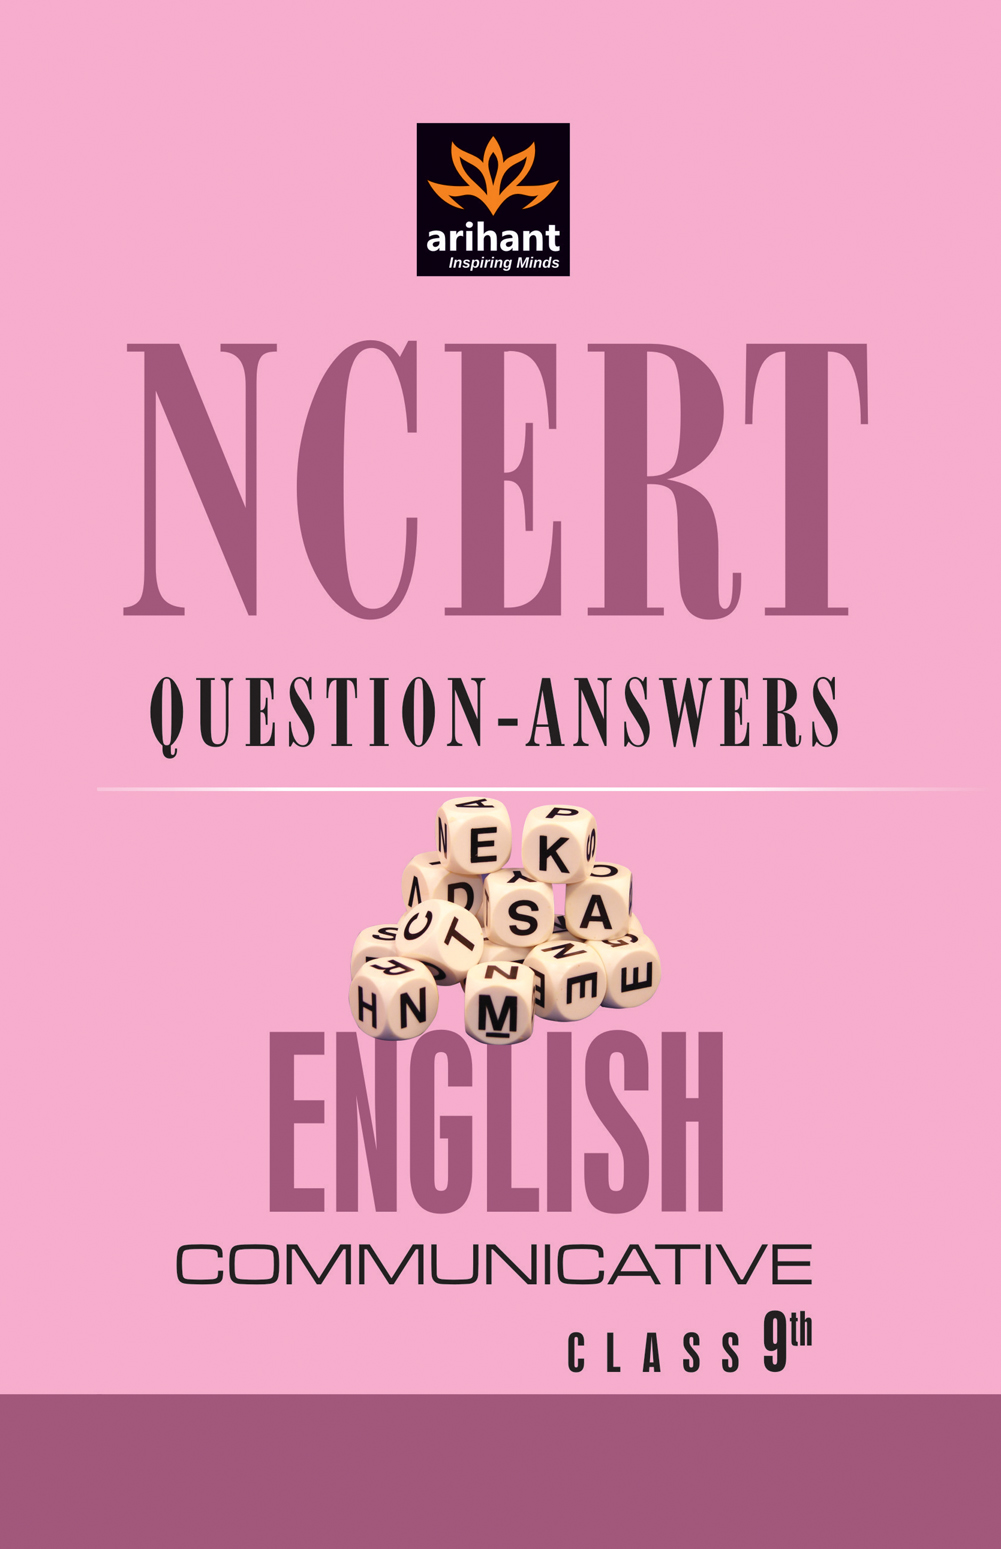 ncert-questions-answers-english-communicative-for-class-9th